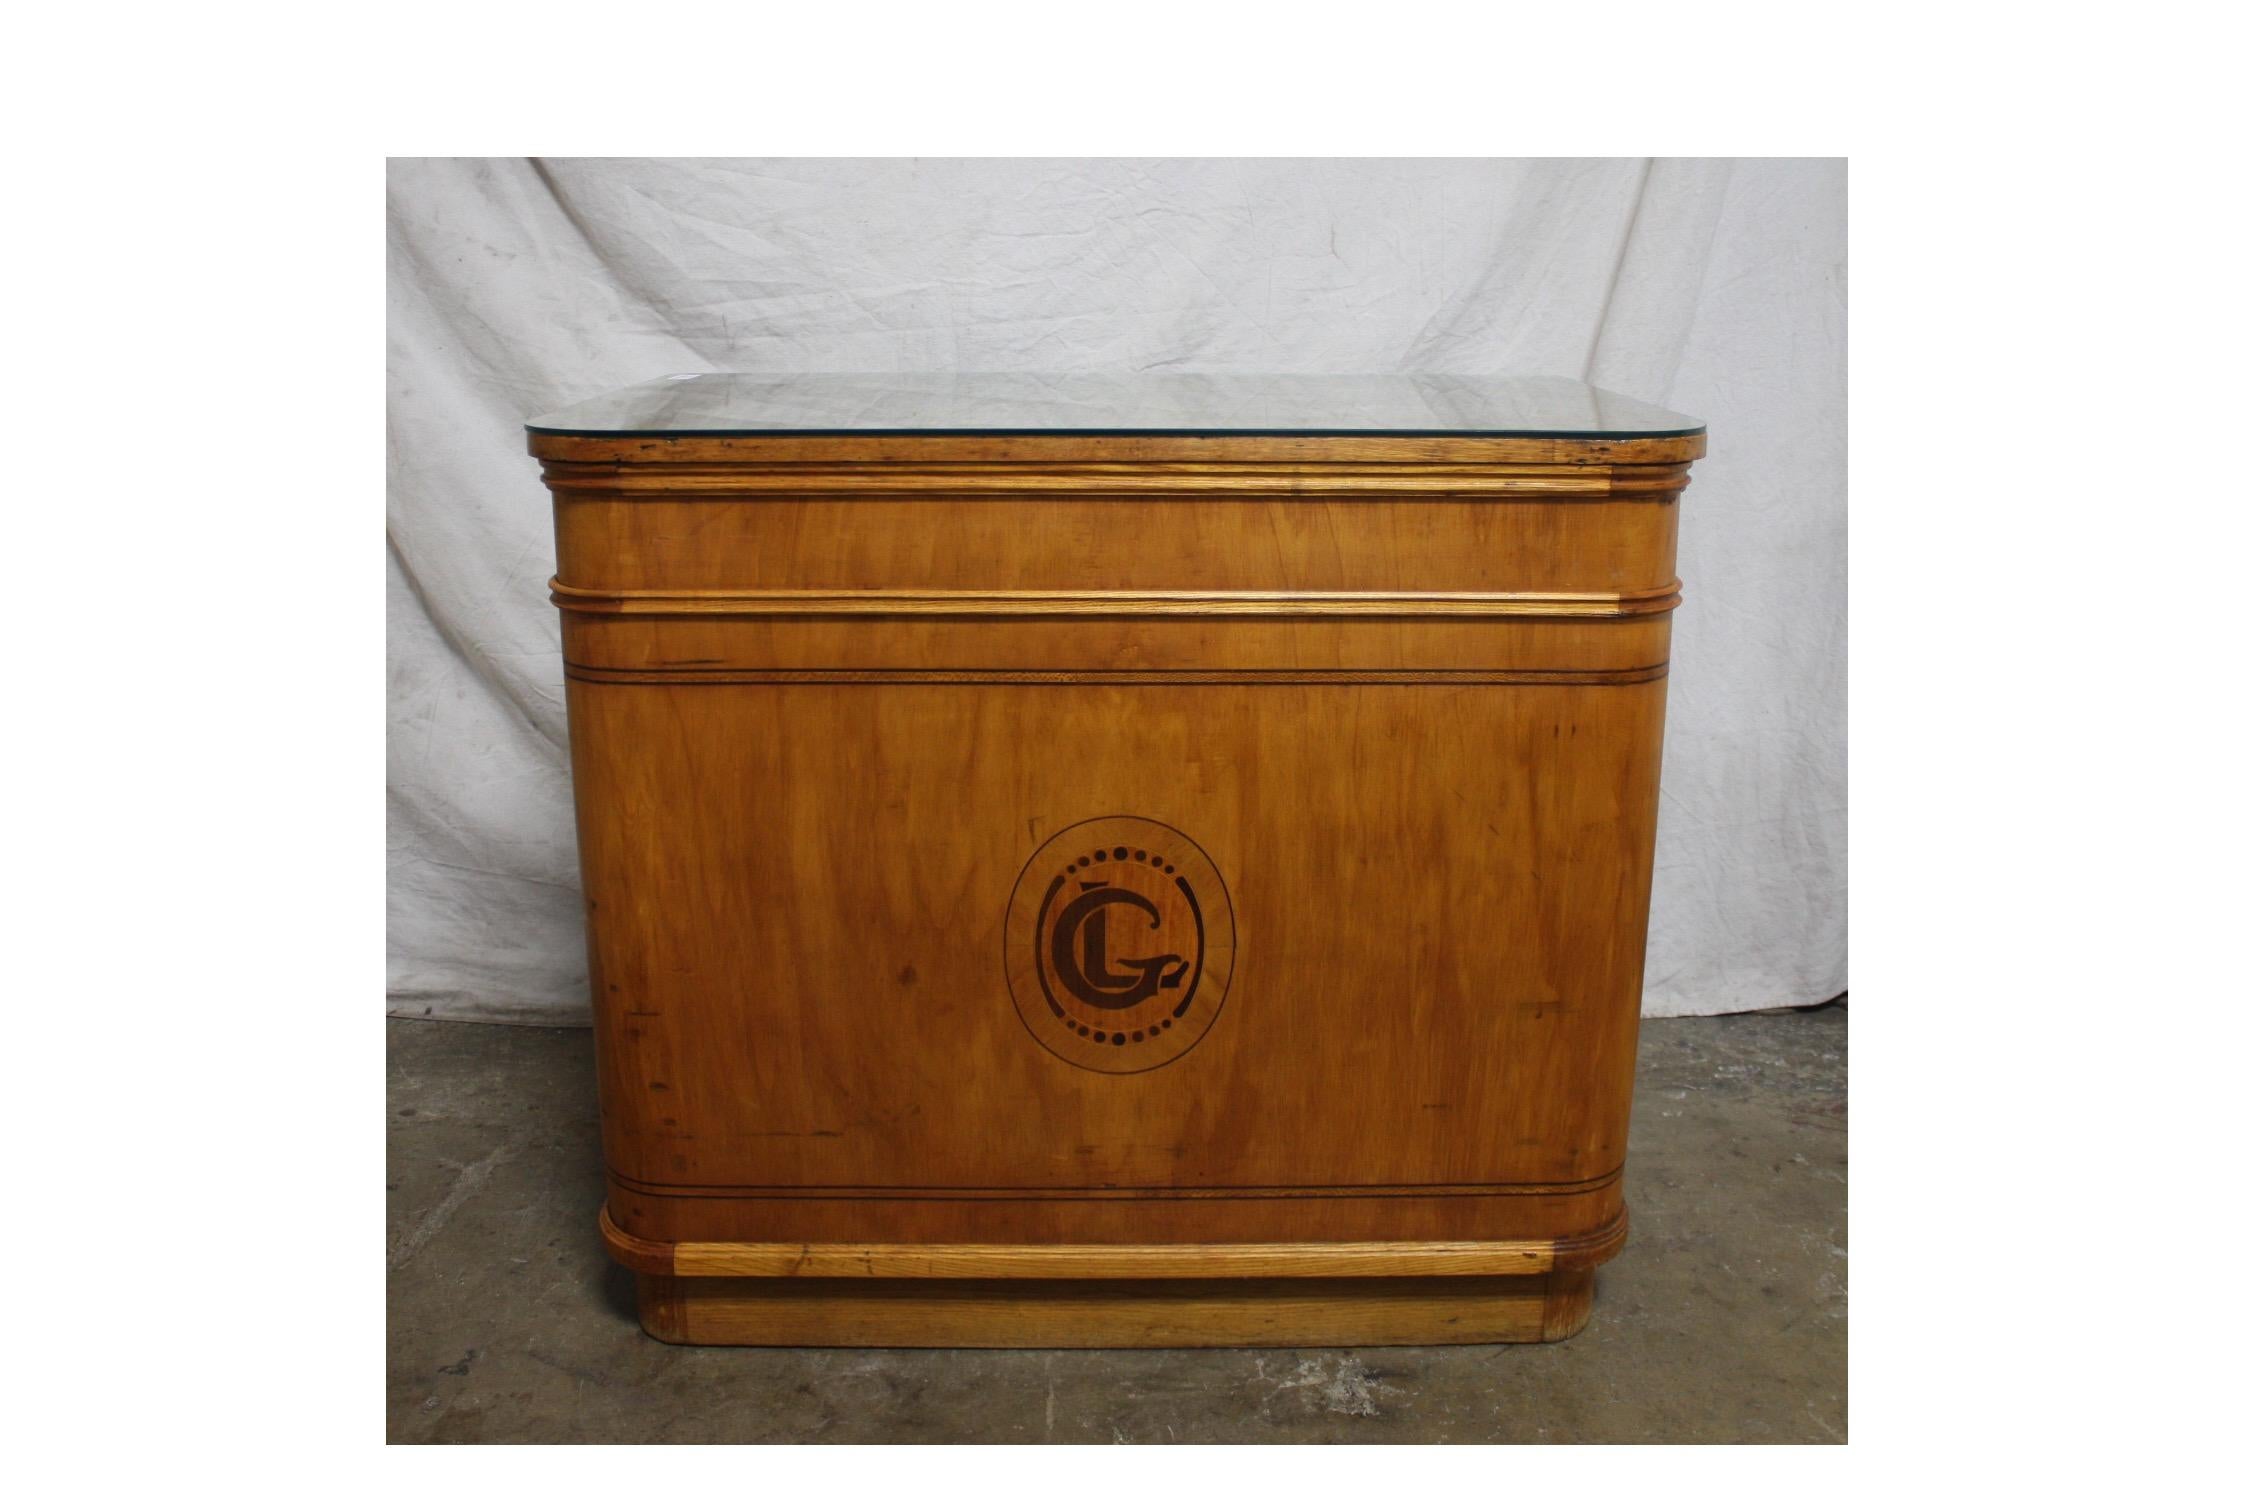 Exceptional early 20th century counter-chest is signed 